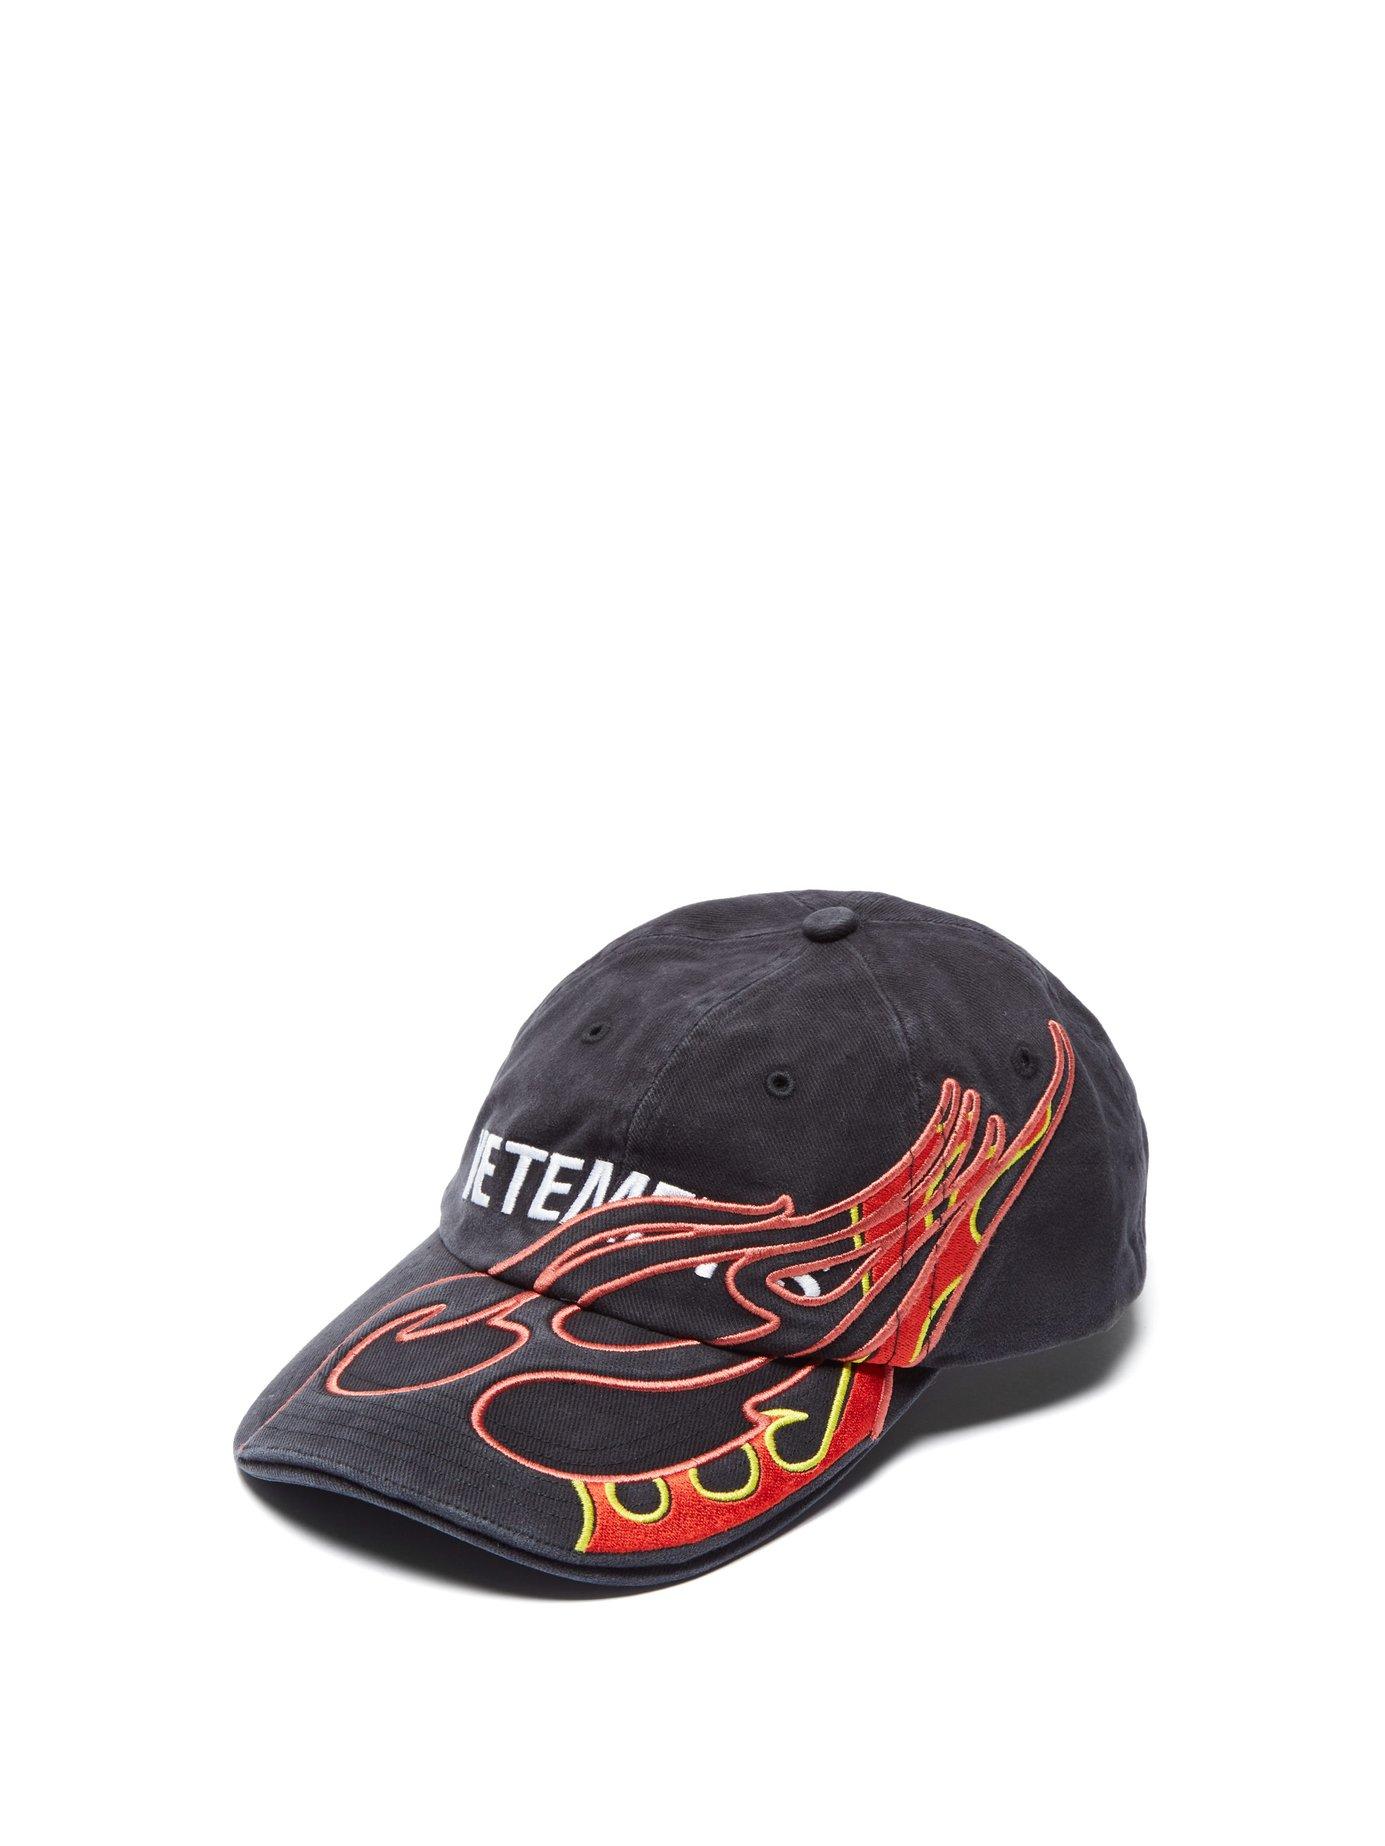 Vetements Flame Embroidered Cotton Baseball Cap in Black | Lyst